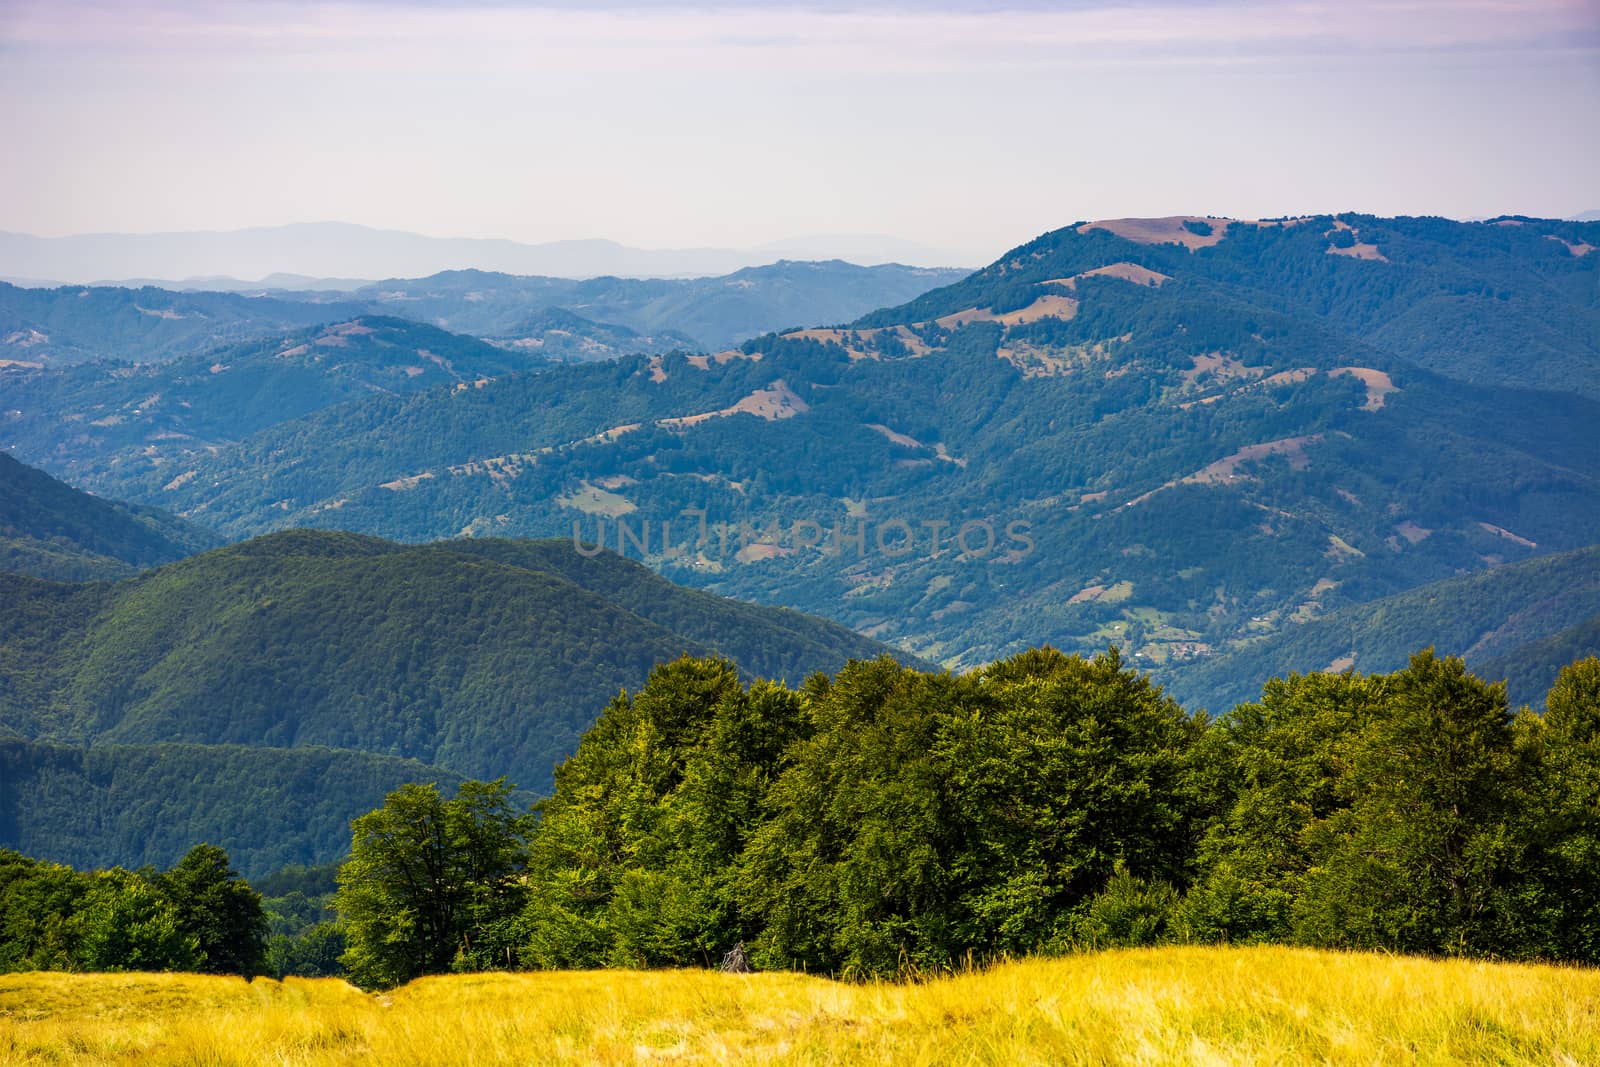 forested hills of Carpathian mountains. beautiful summer landscape. beech trees on a grassy hillside meadow. mountain ridge Krasna in the distance